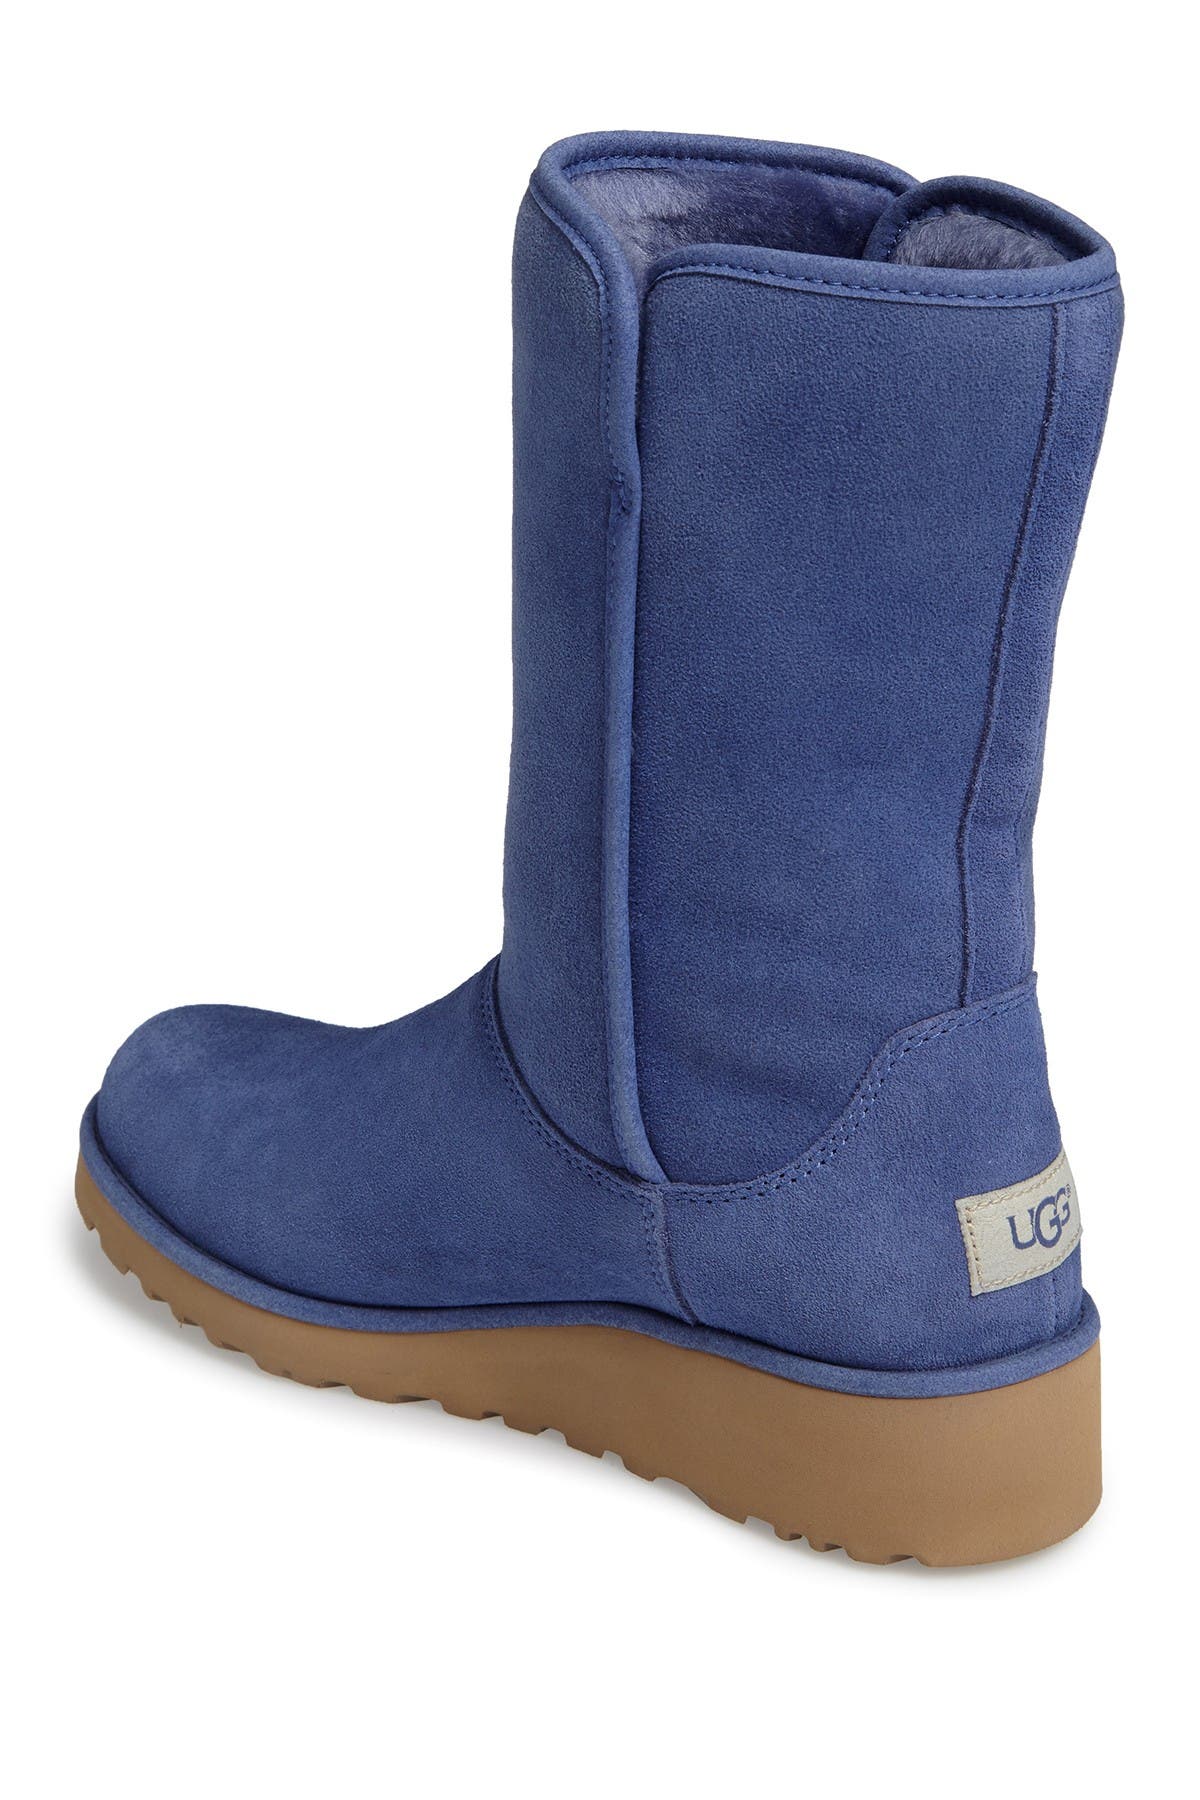 ugg amie tall boot